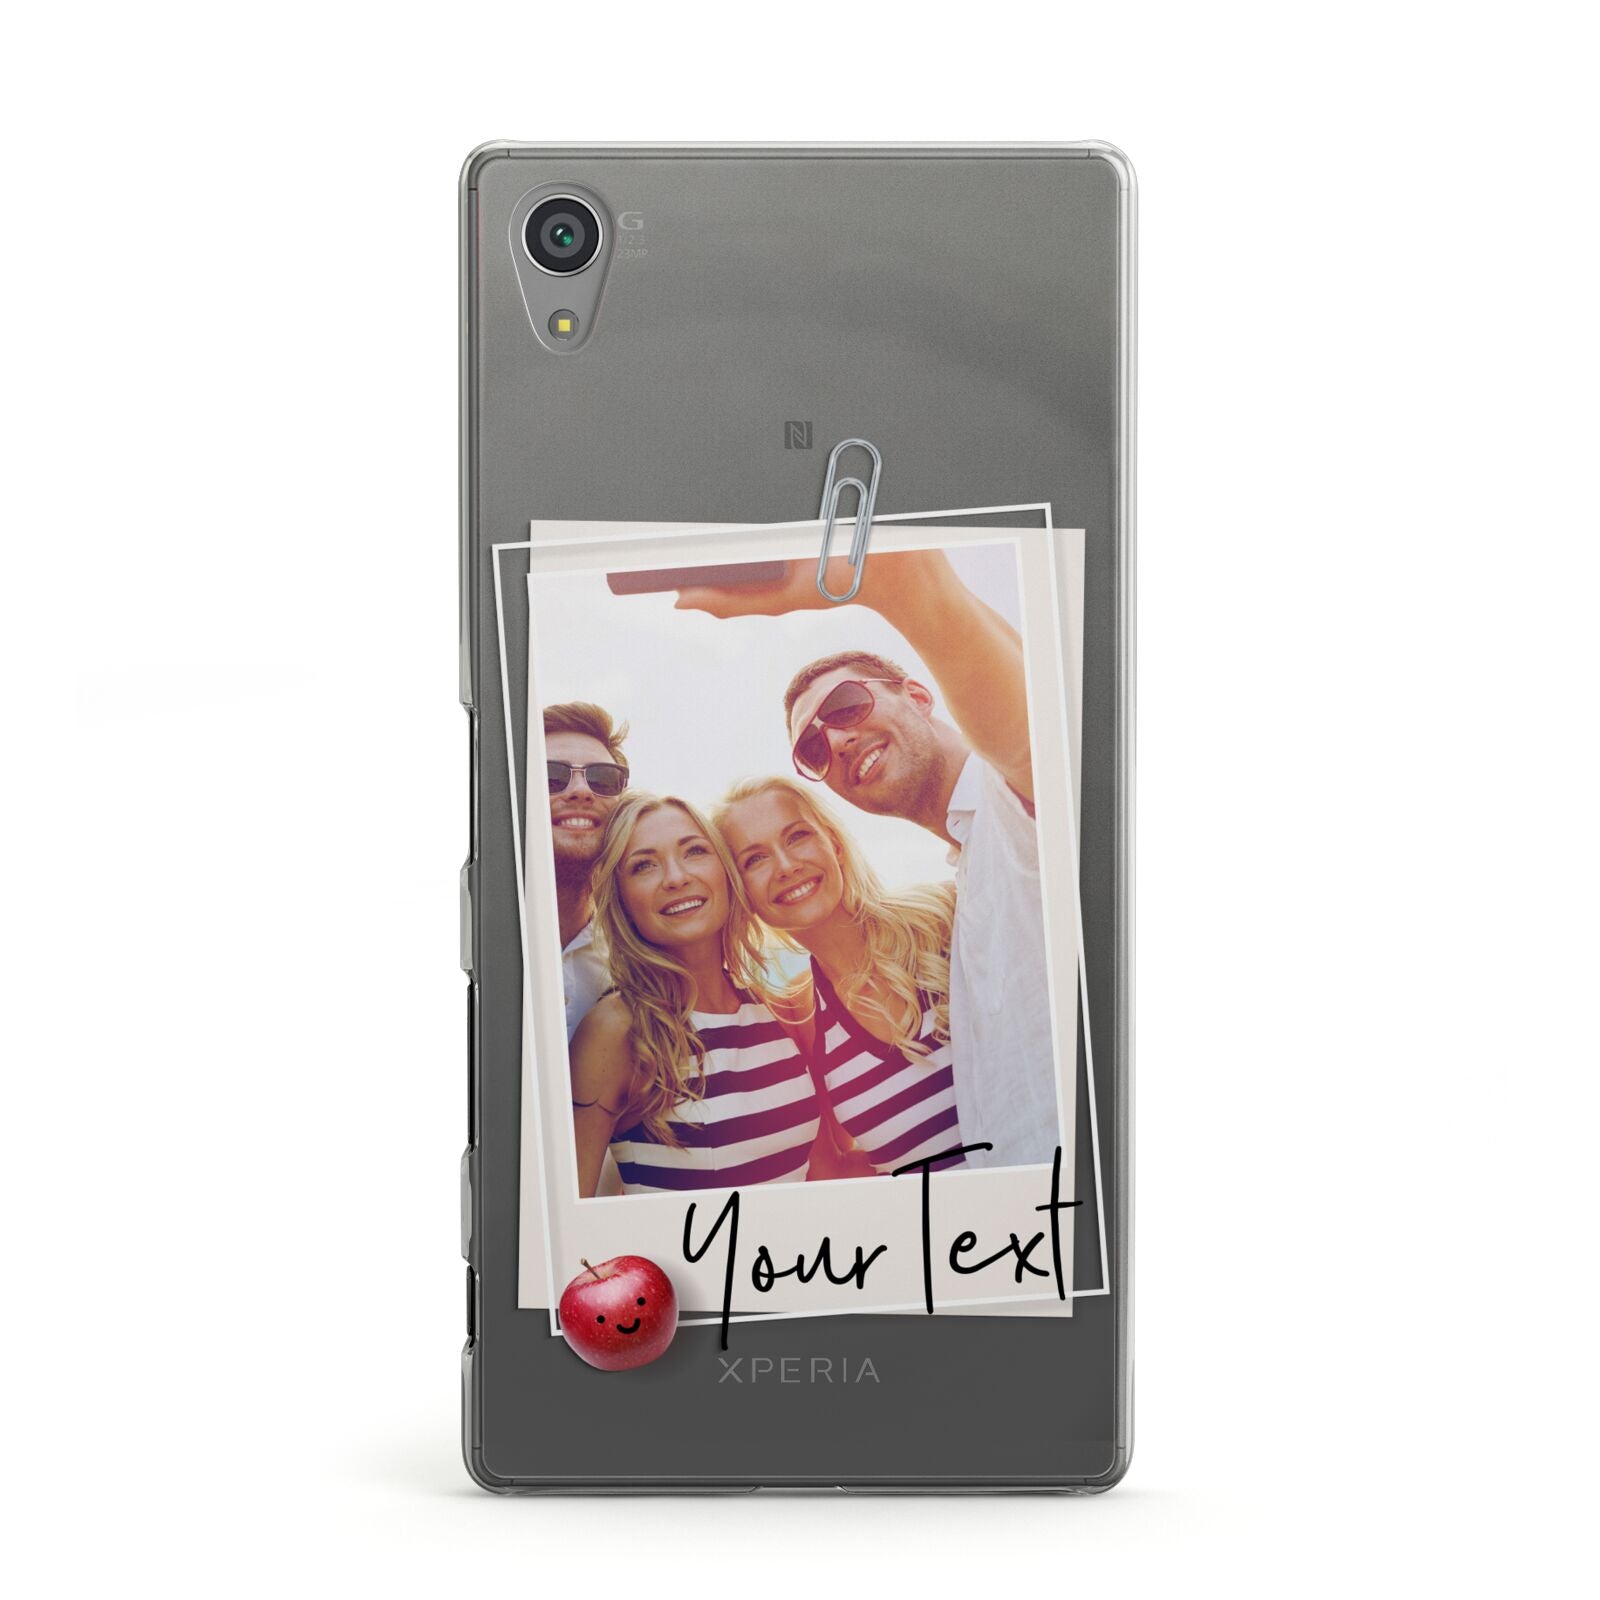 Photograph and Name Sony Xperia Case